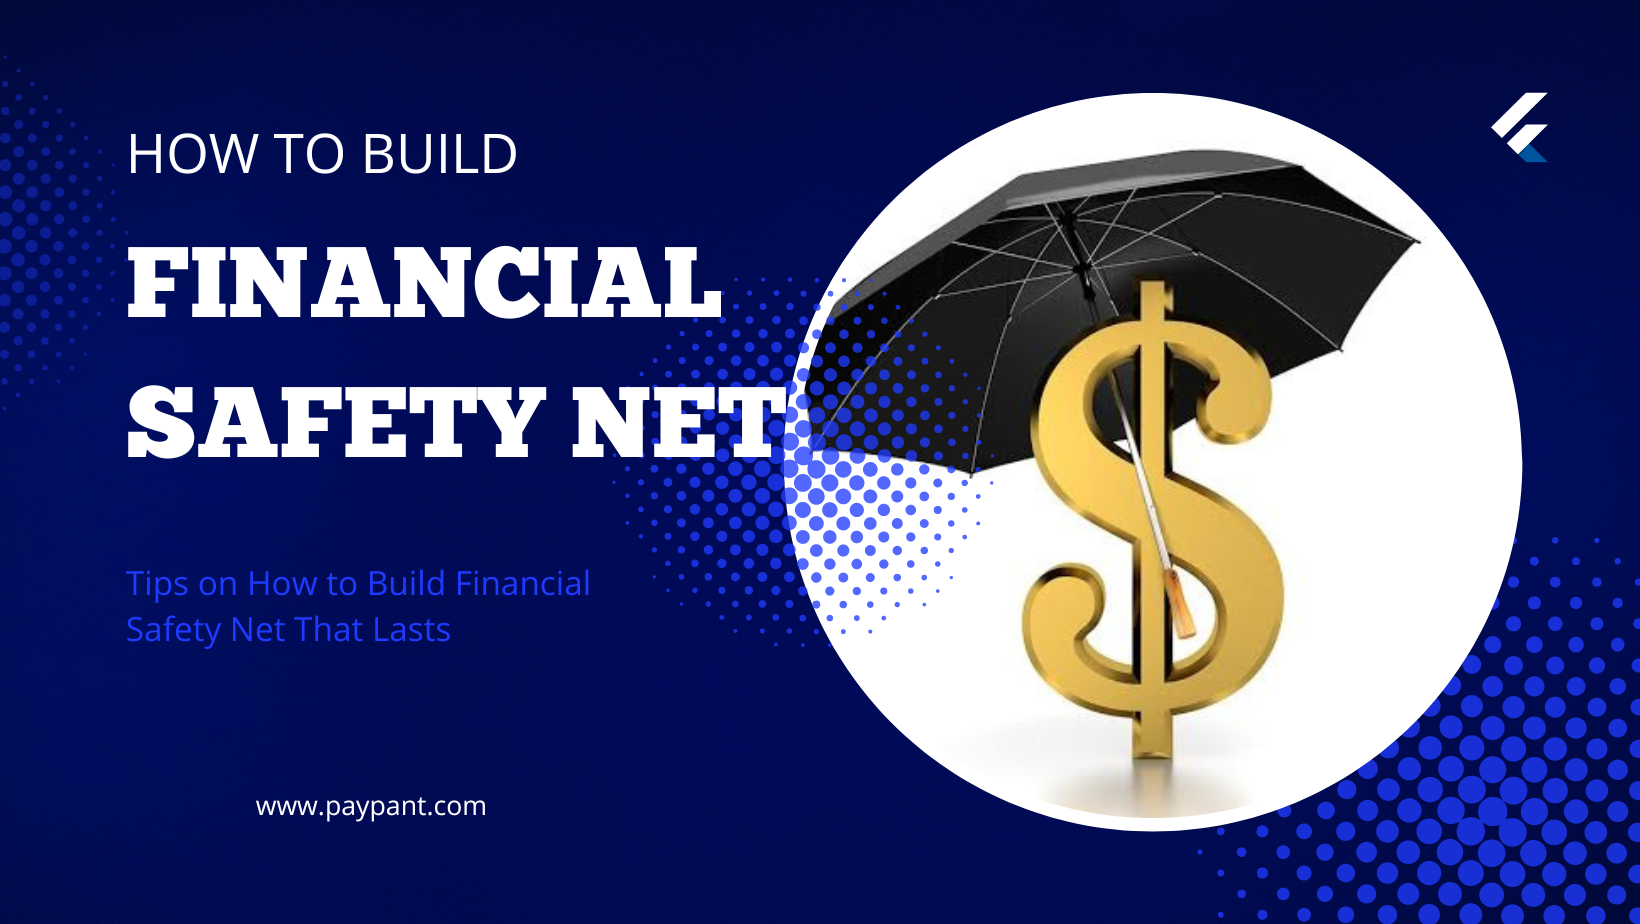 What is a Financial Safety Net? And Why is it Important? www.paypant.com